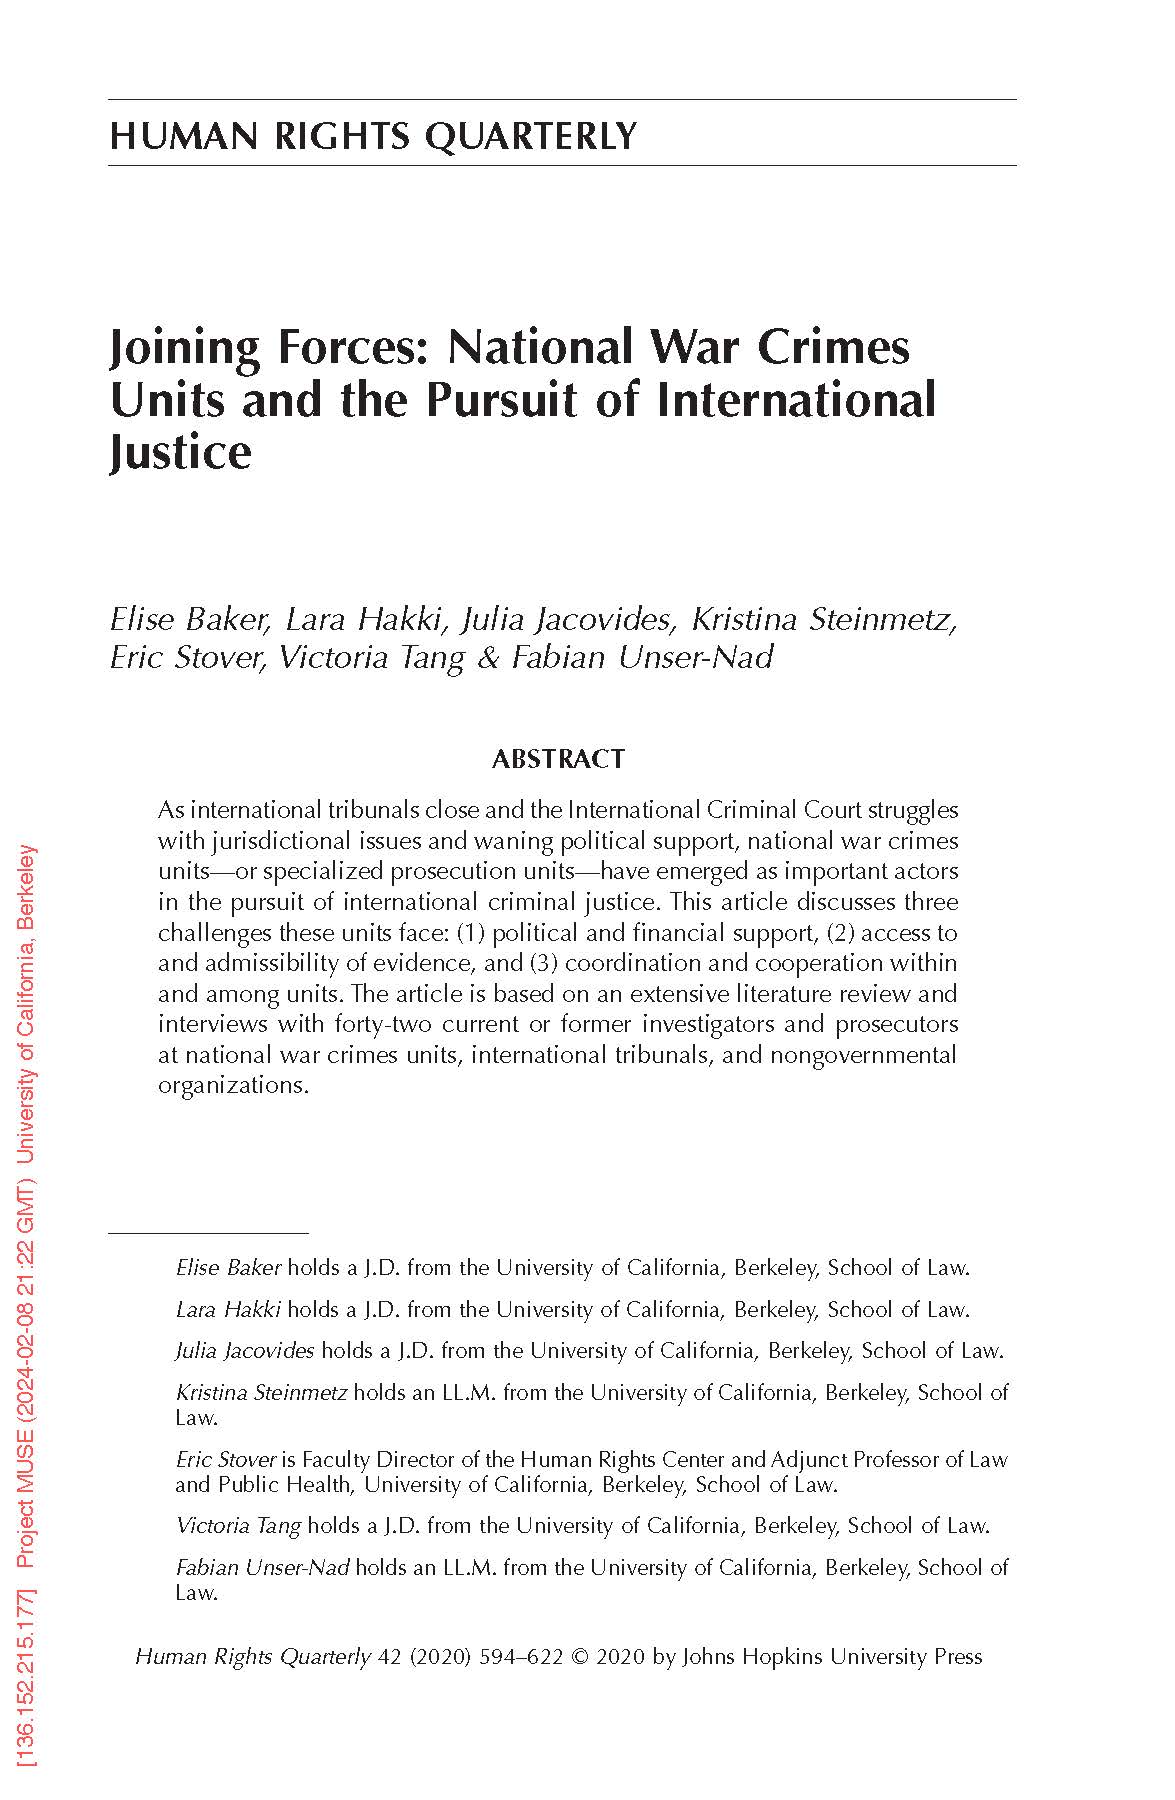 Pages from Joining Forces- National War Crimes Units and the Pursuit of International Justice